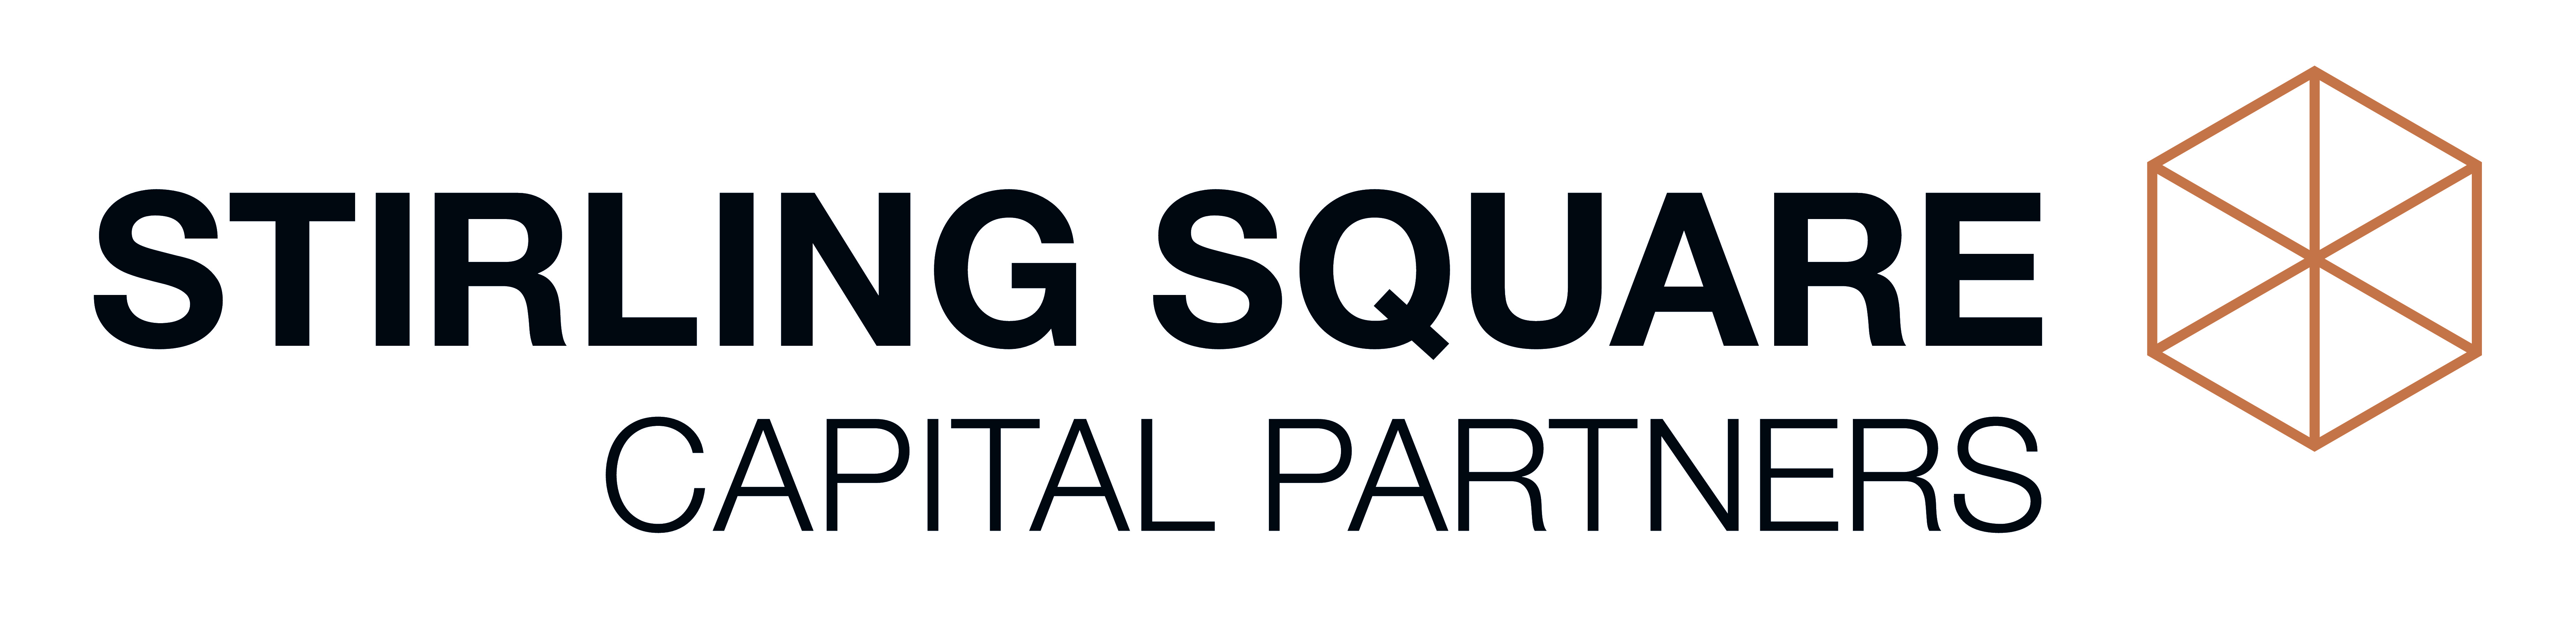 Stirling Square Capital Partners